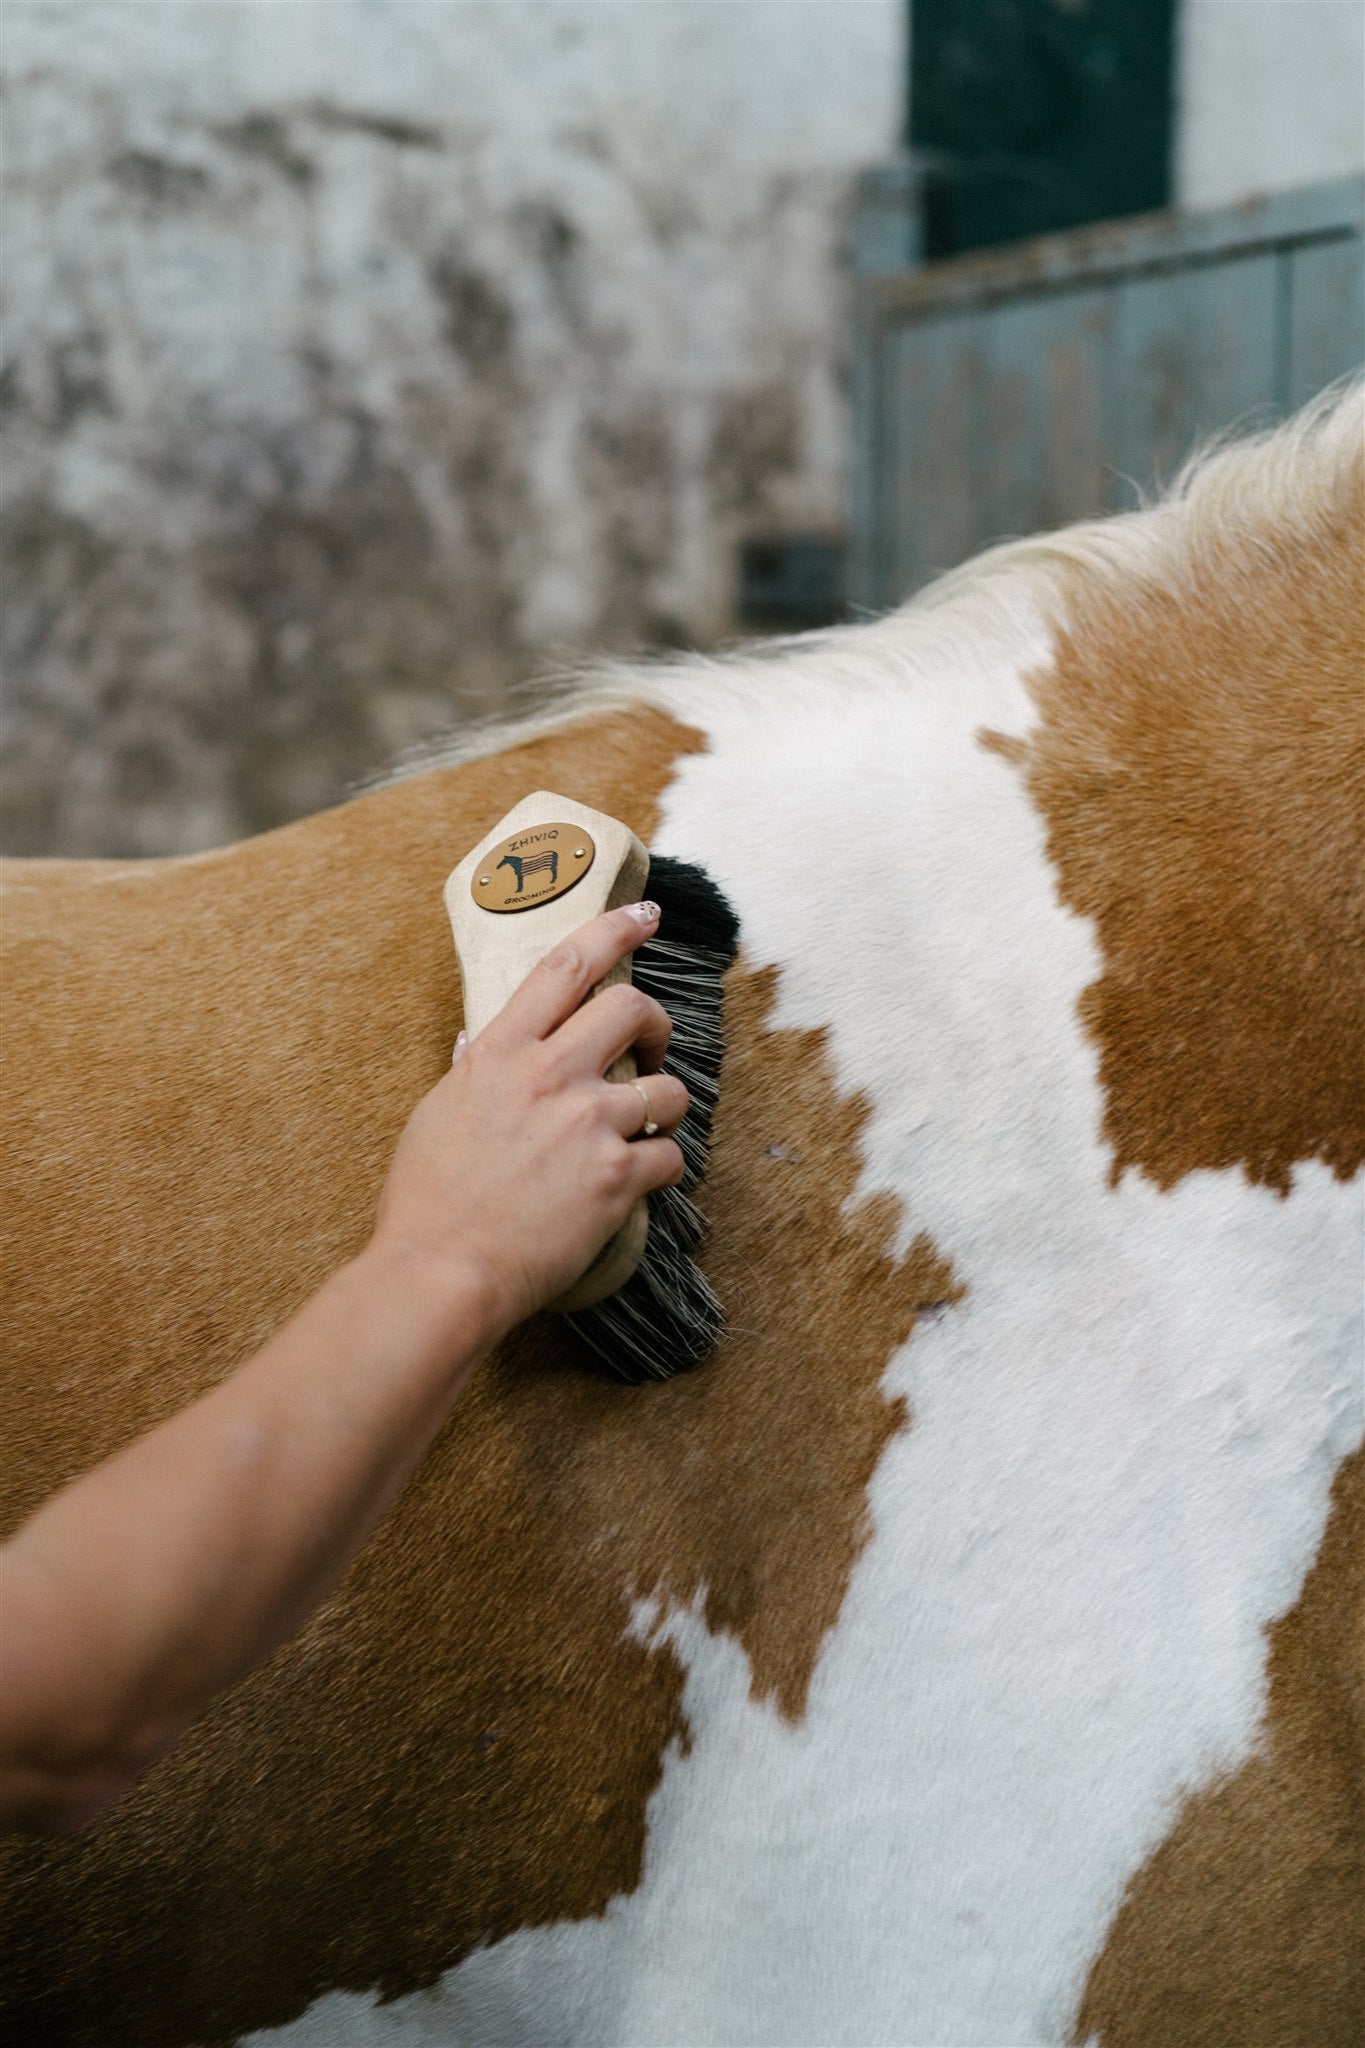 Everything you want to know behind the brand ofZhiviq Banana Medium - Horse Brush - Suitable for removing sand and dirt.